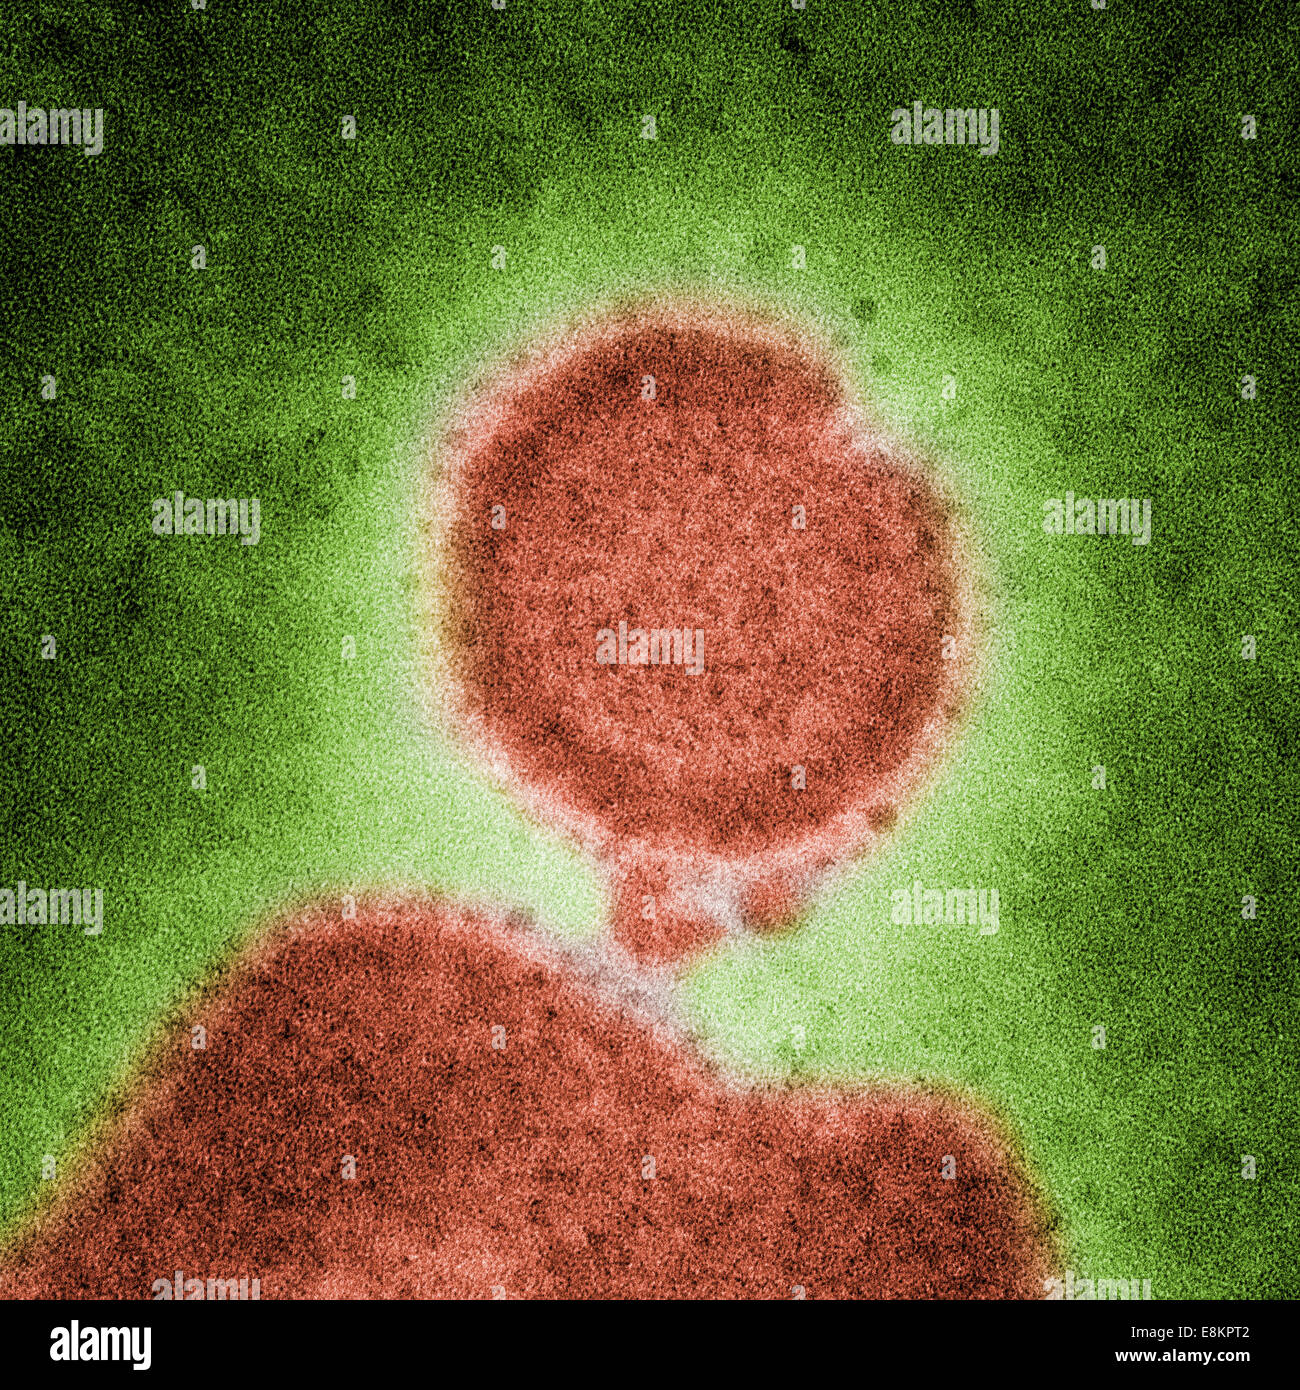 Under high magnification, this colorized negatively-stained transmission electron micrograph (TEM) captured some of Stock Photo